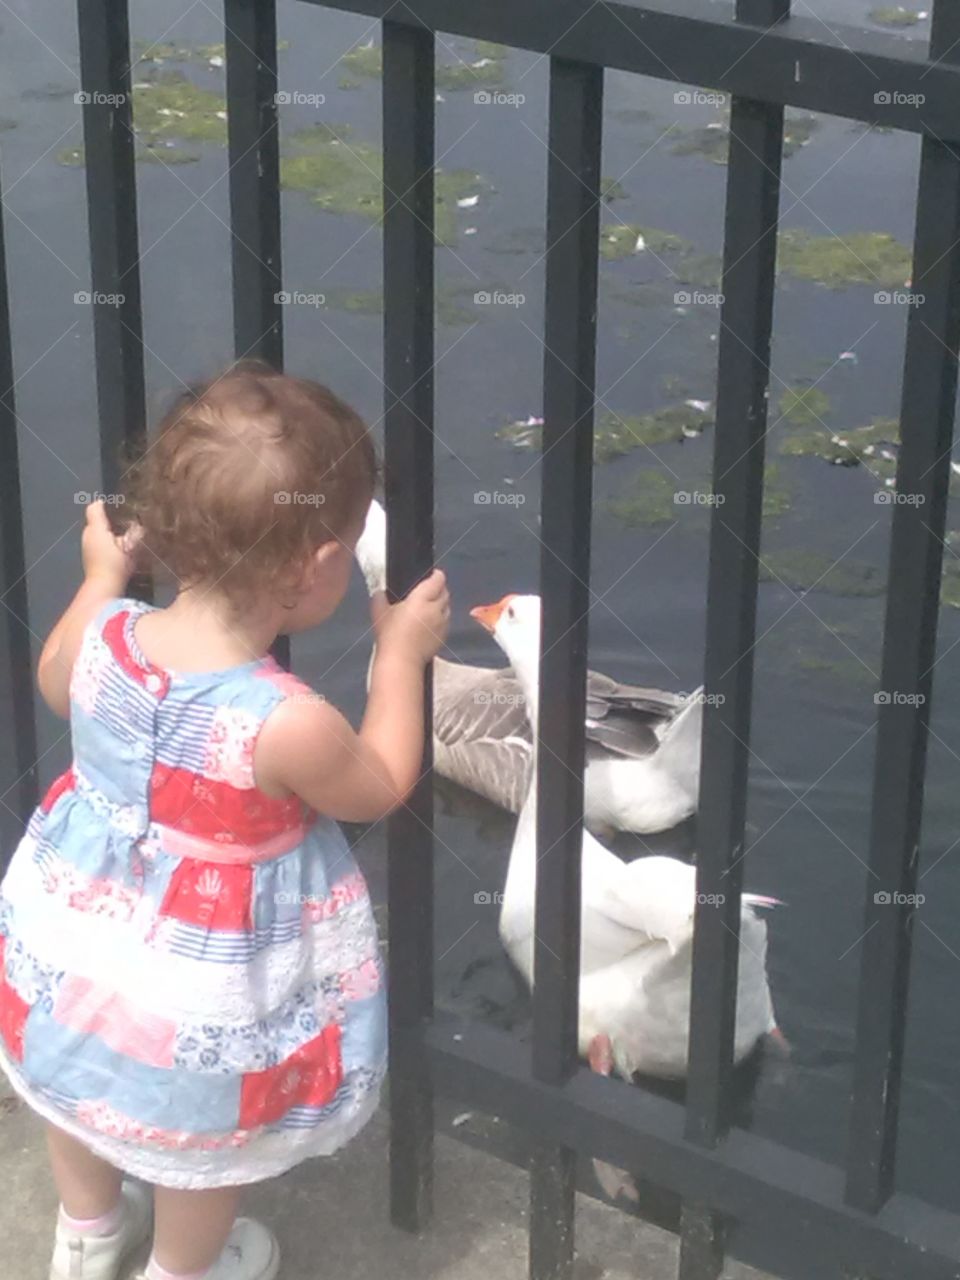 A day at the park with the ducks